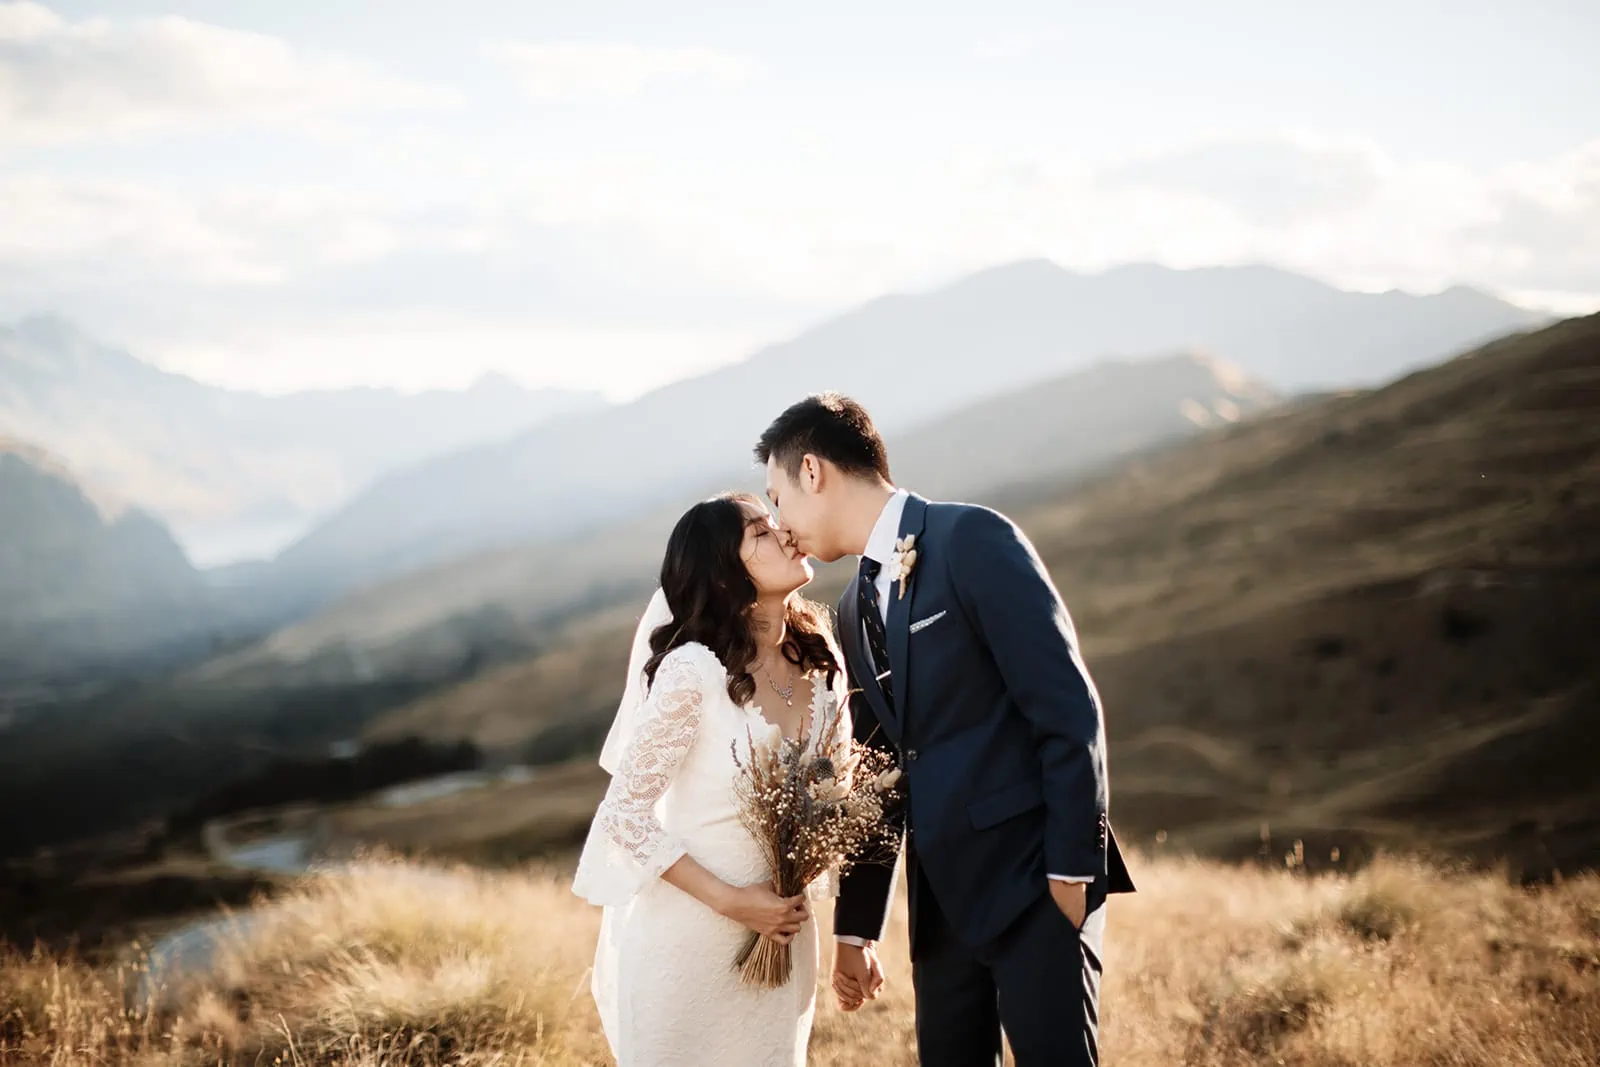 Dios and Carlyn share a kiss in the mountains during their Queenstown Heli Pre Wedding at Cecil Peak.